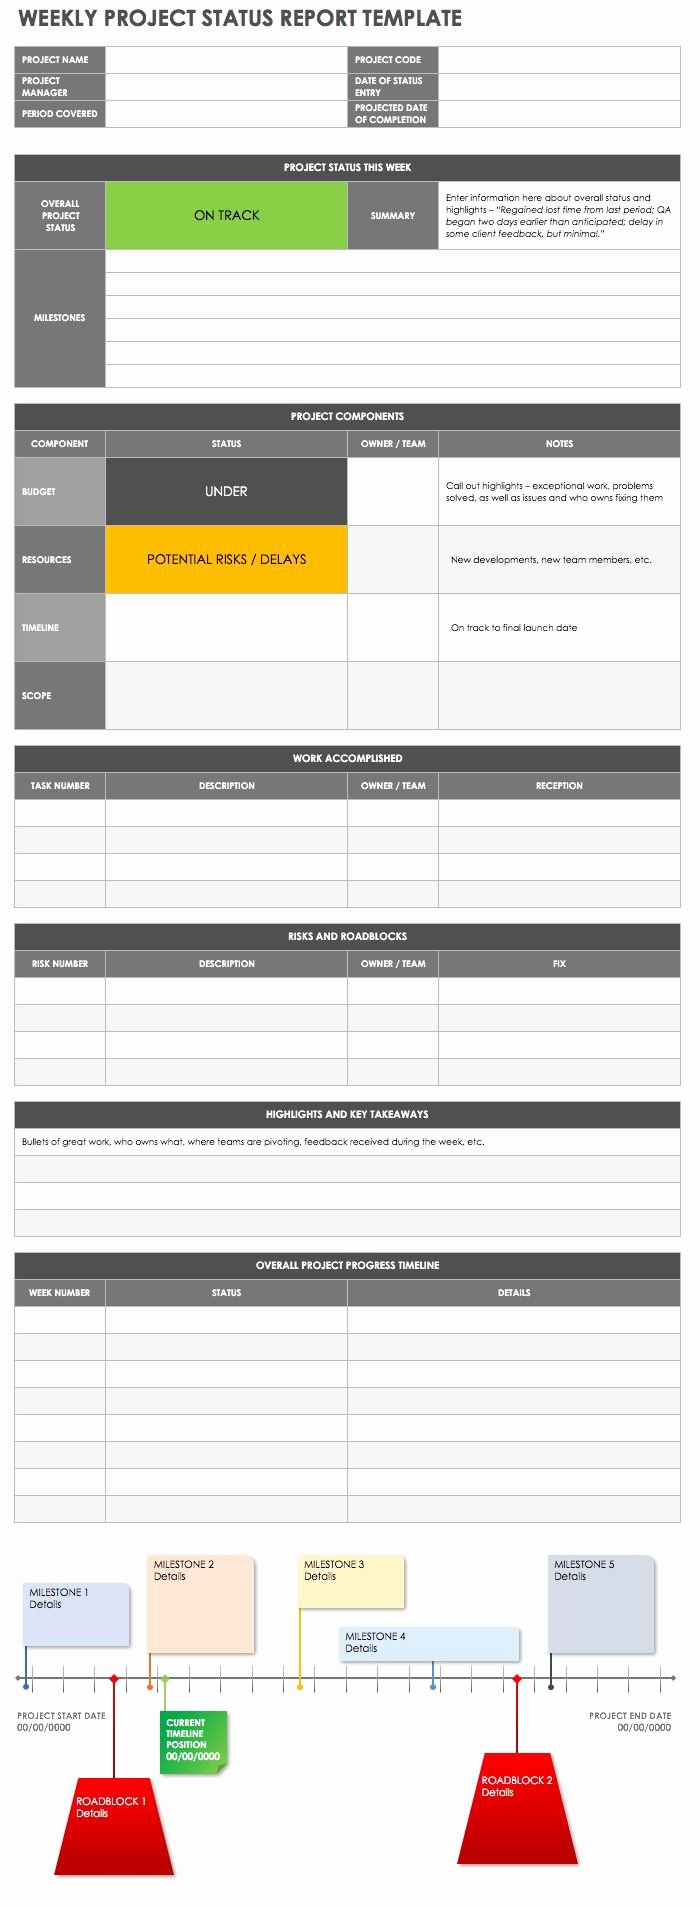 Weekly Project Status Report Template New How to Create An Effective Project Status Report